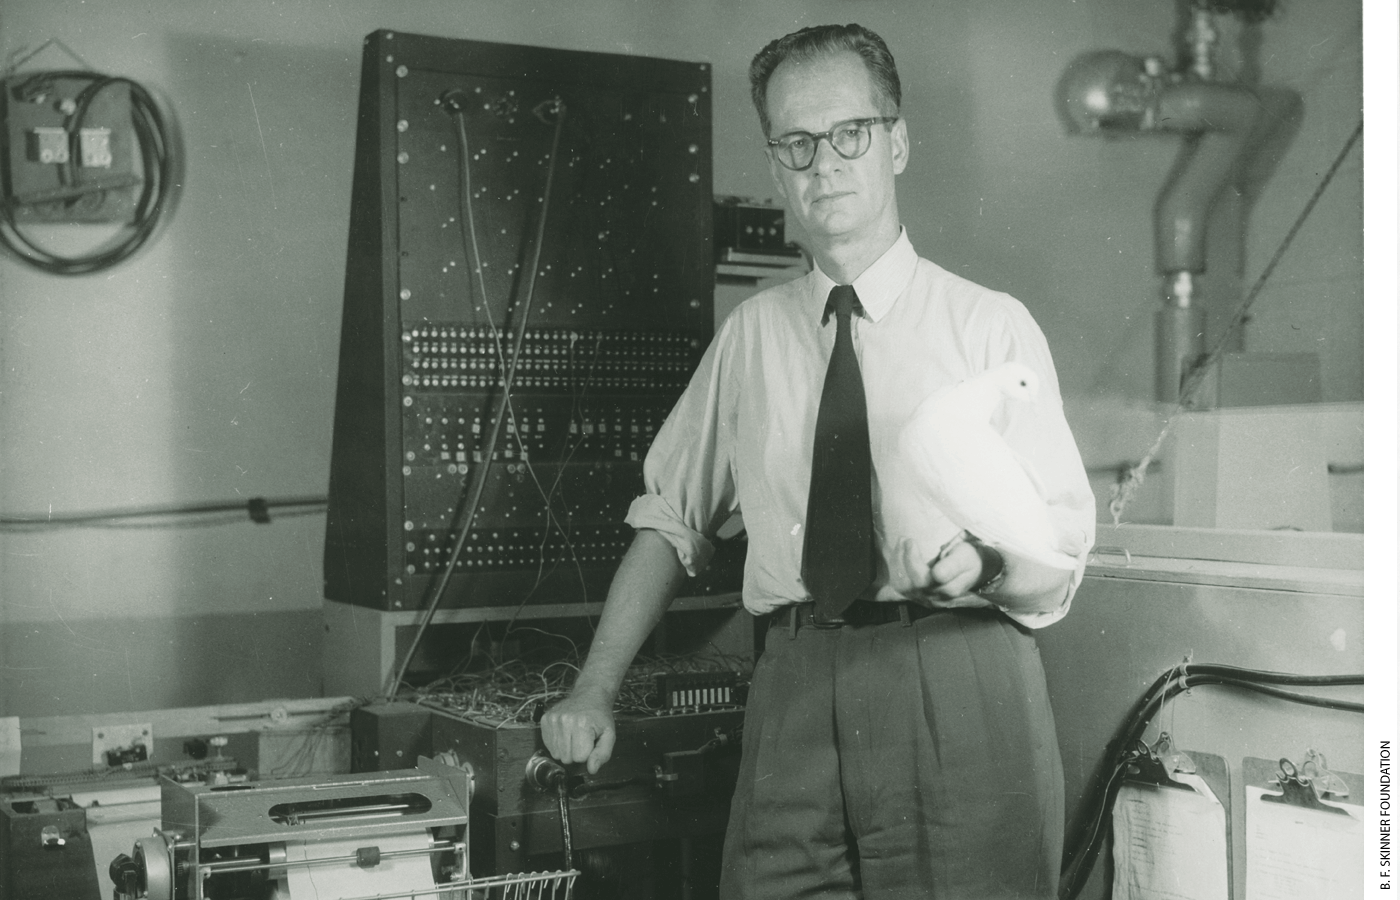 B. F. Skinner taught pigeons to play ping-pong using “operant conditioning.” His teaching box pioneered methods now used in computer-aided instruction.